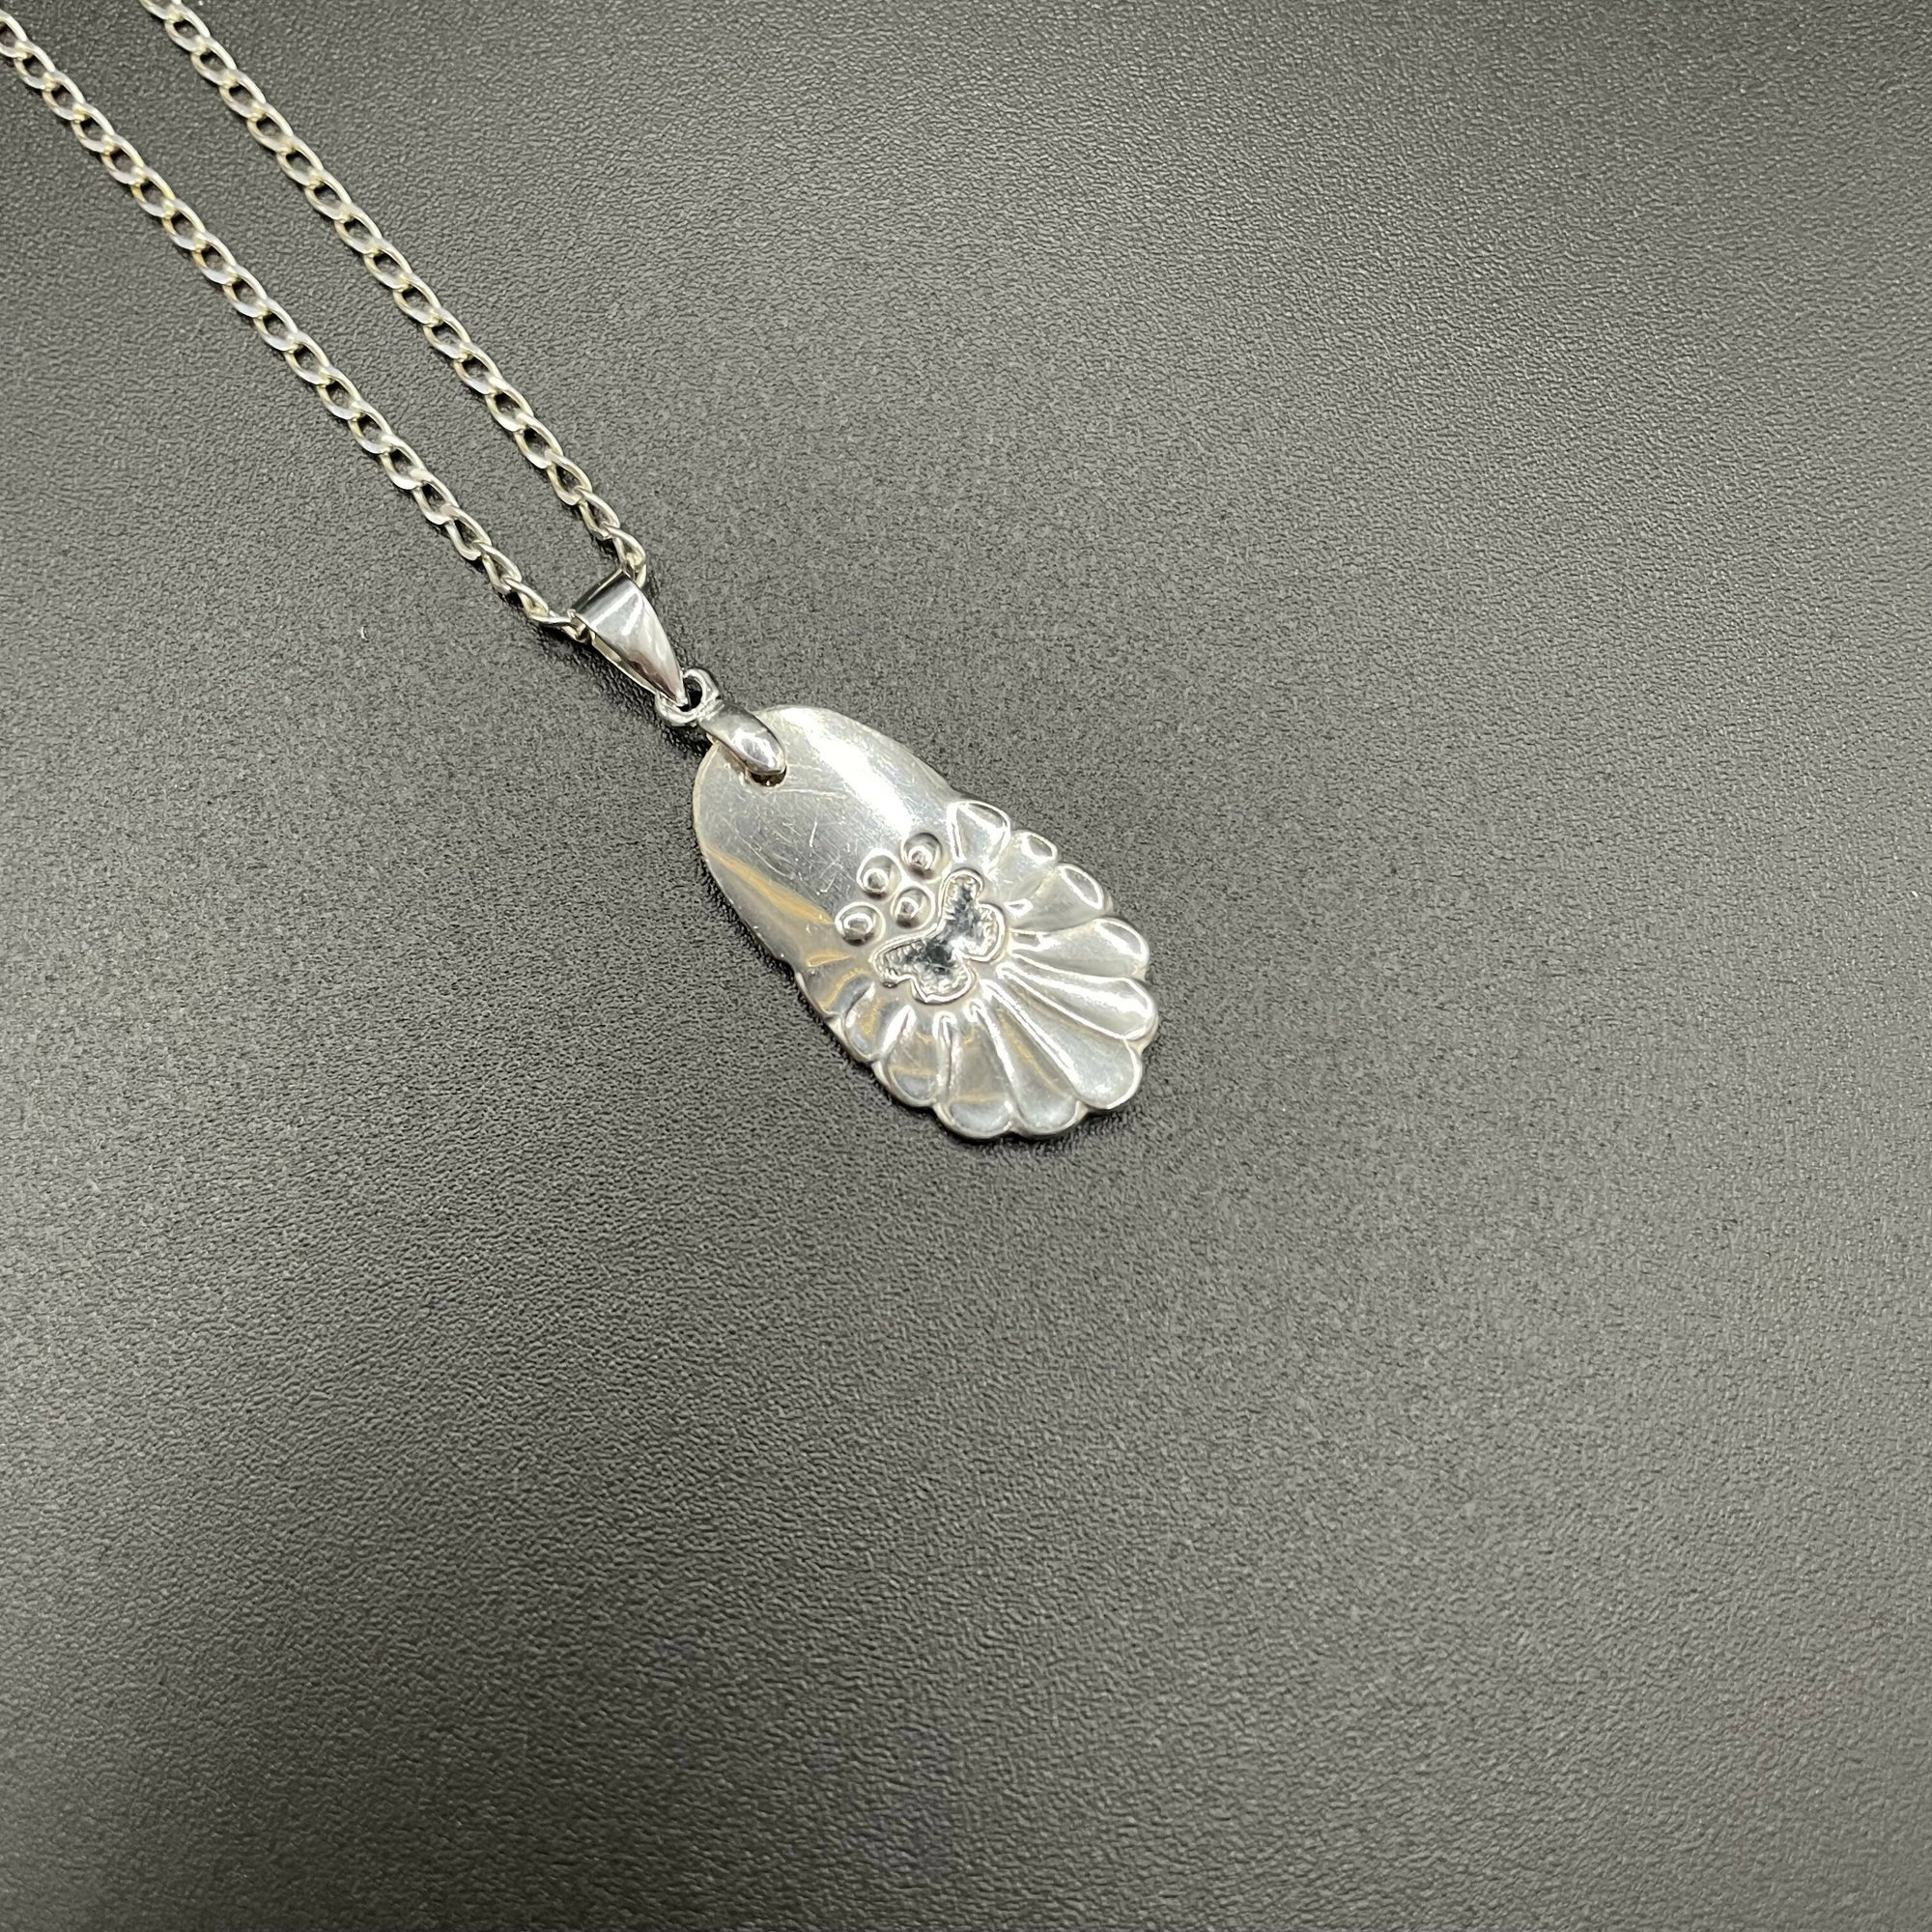 Repurposing By Glenna | Silver Spoon Butterfly Pendant on 16" Sterling Silver Chain